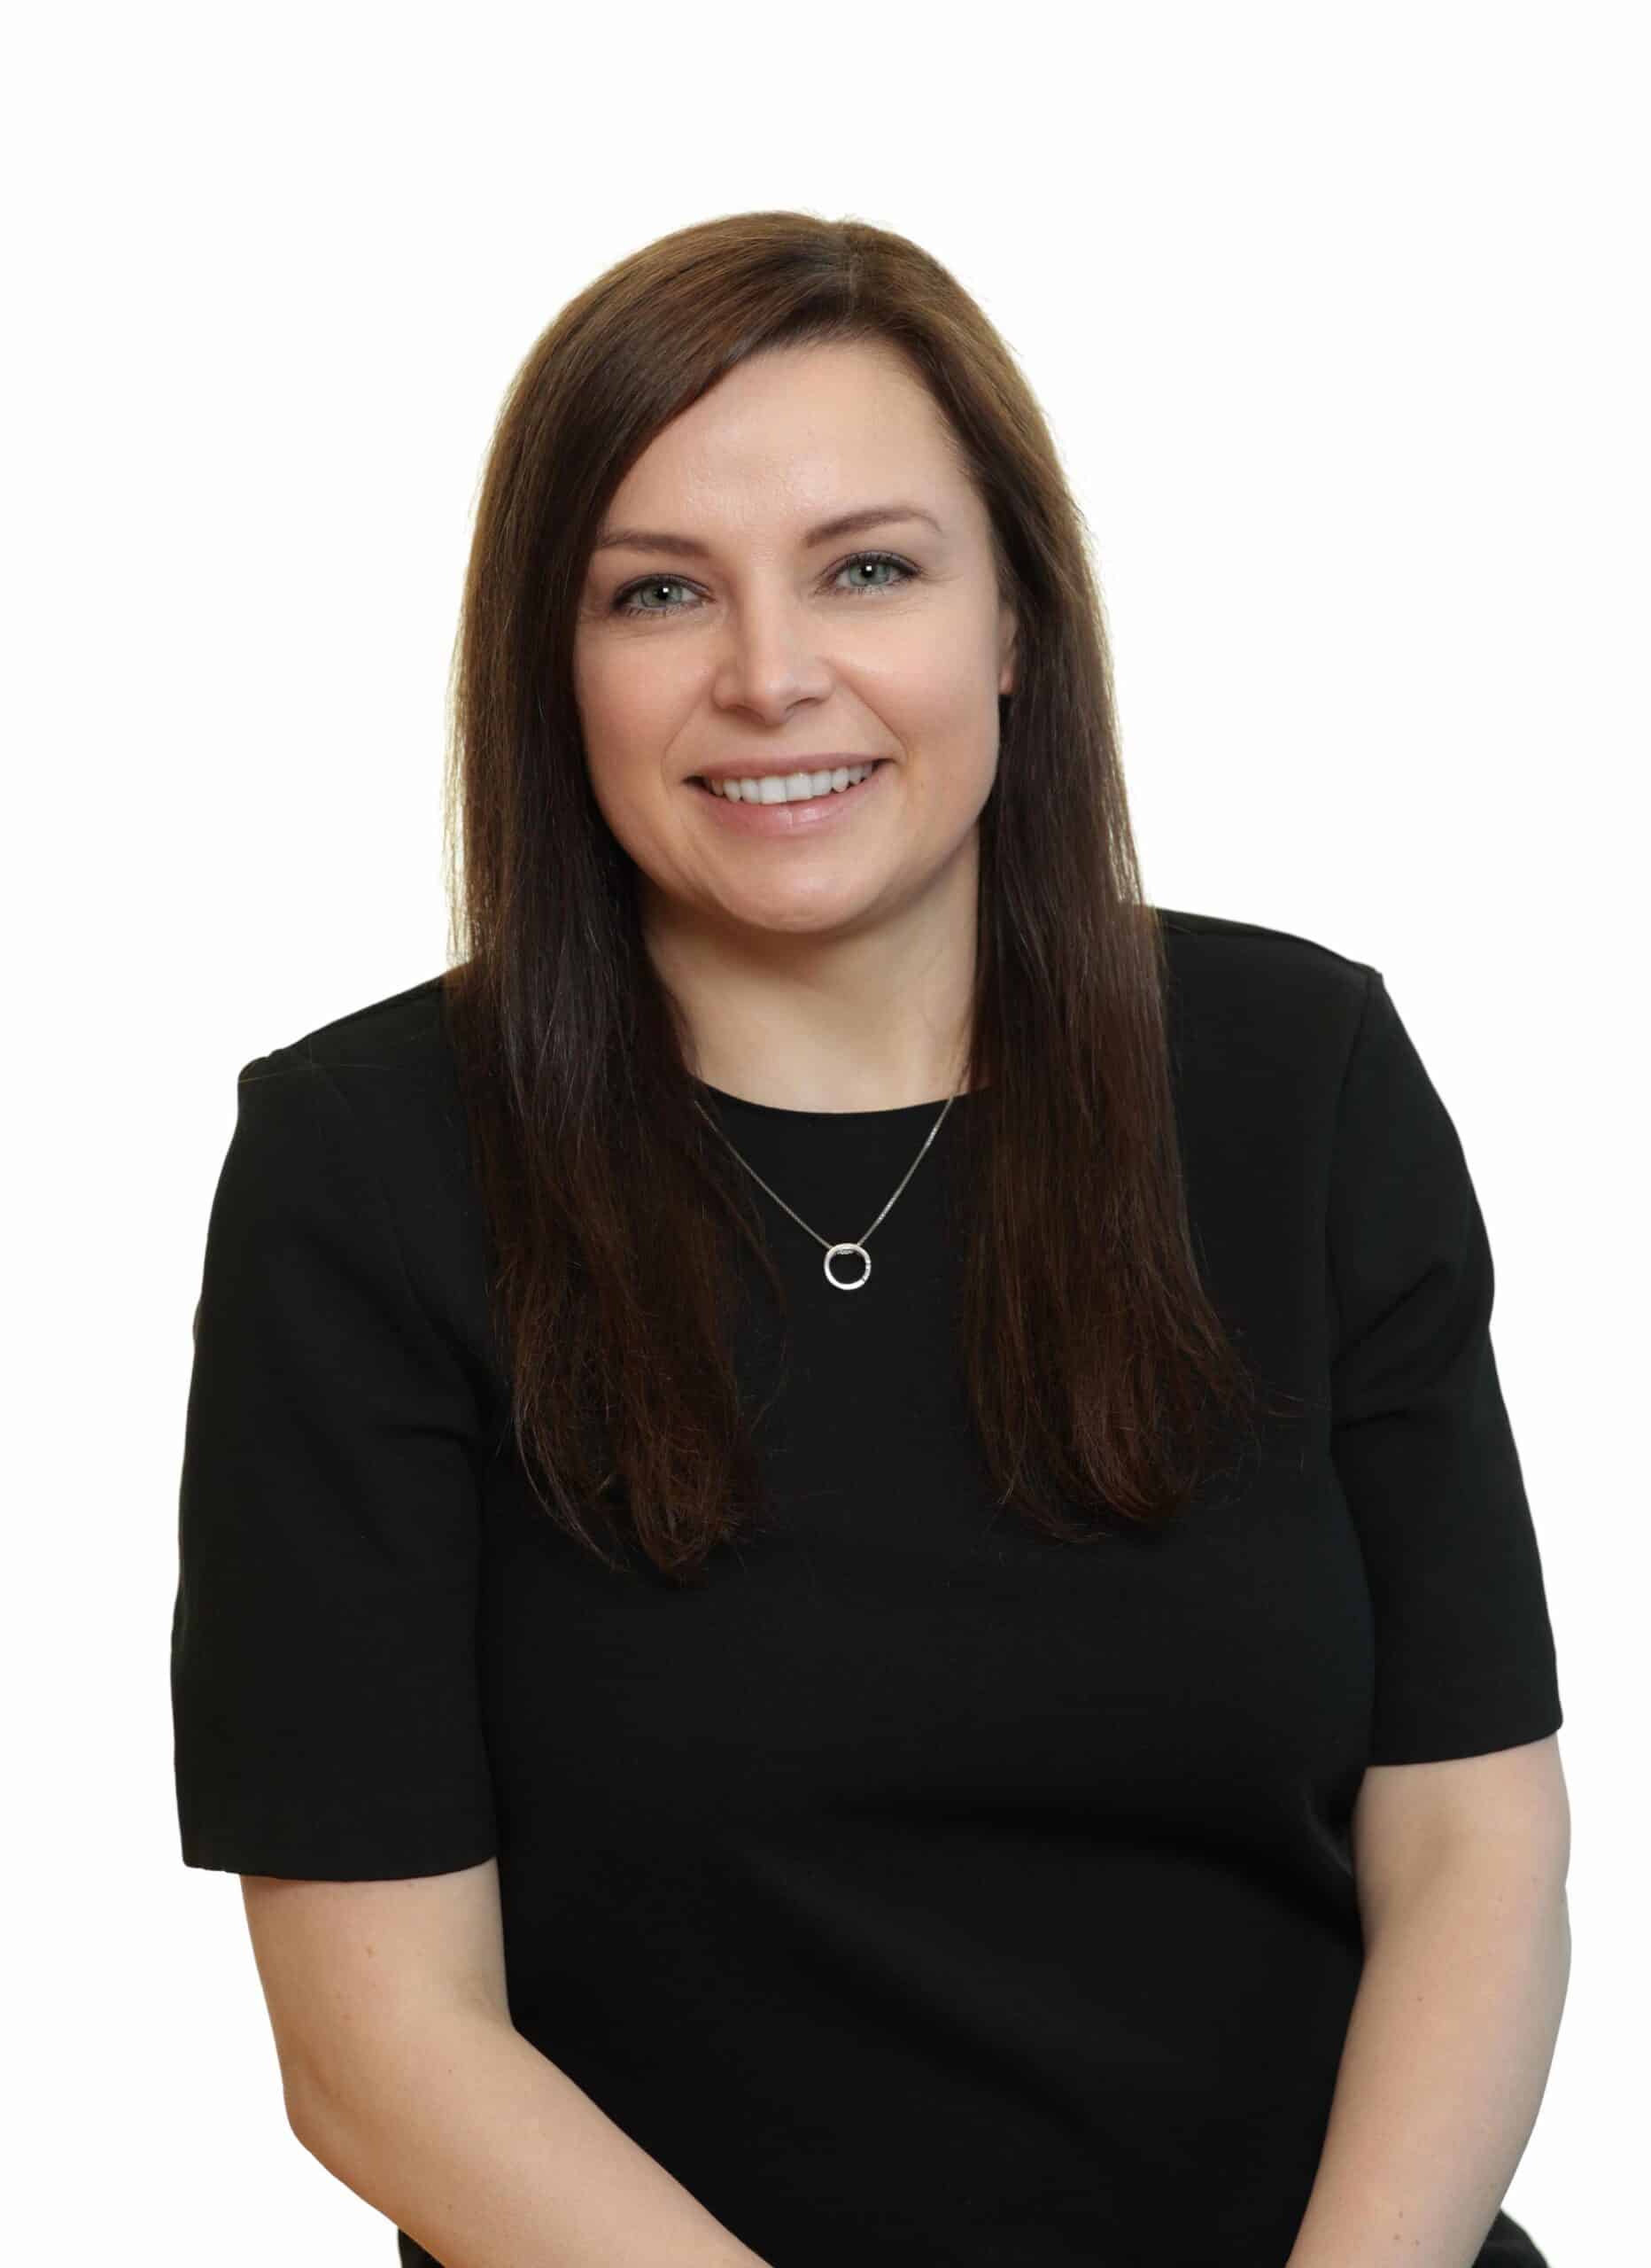 A photo of Justyna Banasik smiling because she is appointed Head of Sustainability in Ireland of Allianz Insurance, one of the country’s largest insurers